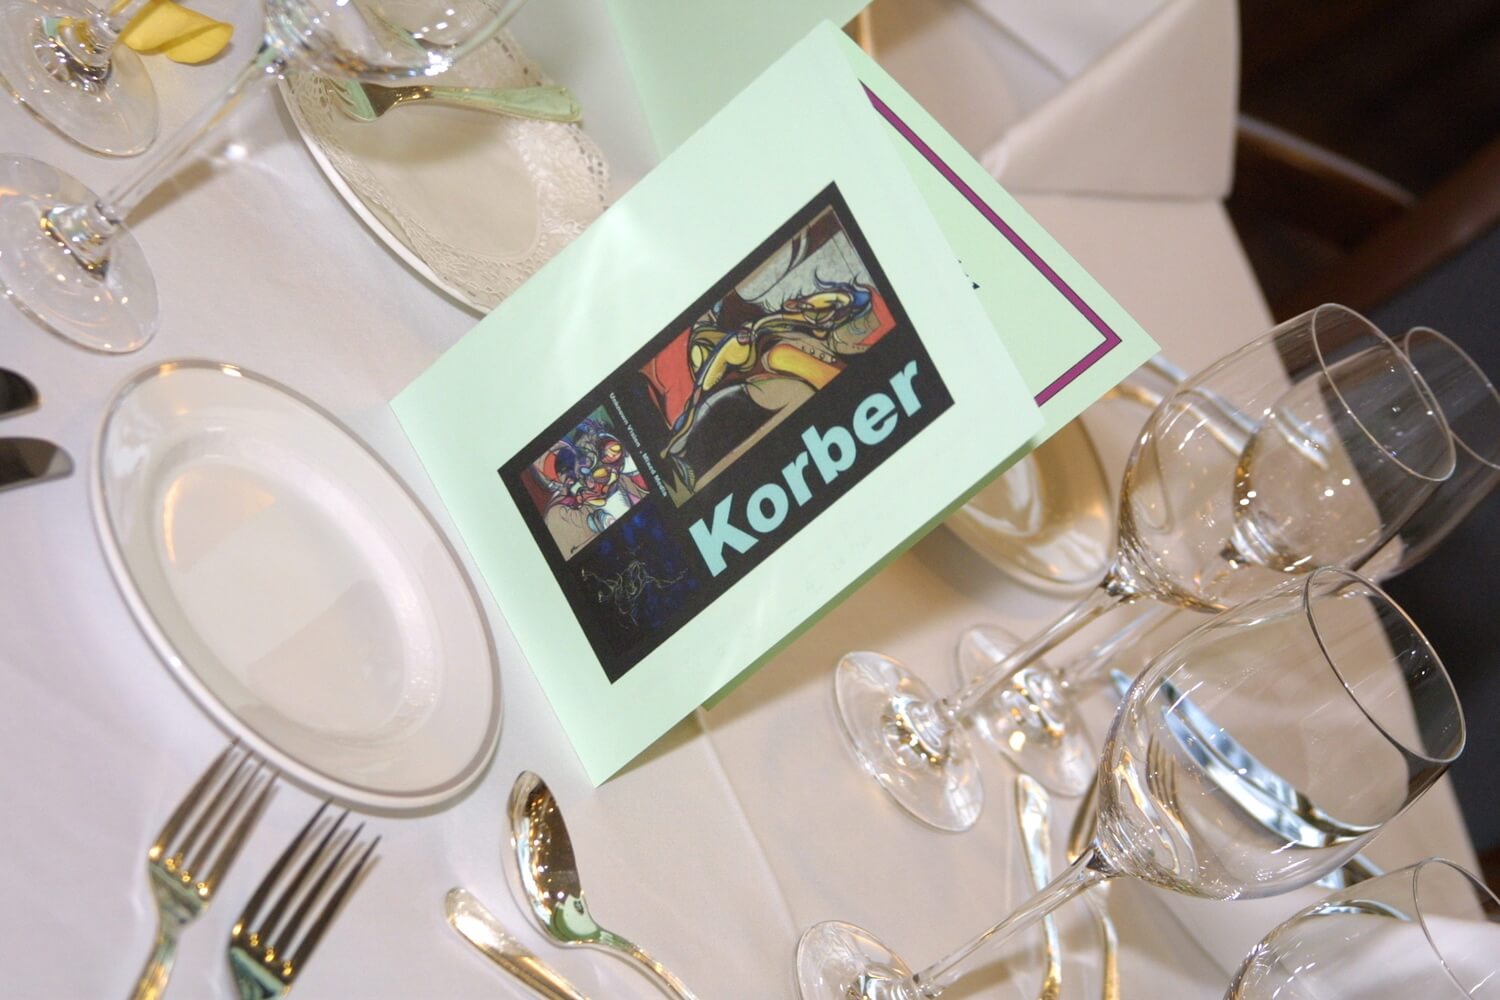 Photo of Korber's Gala Event Program in Club Monet - Luxembourg City, Luxembourg